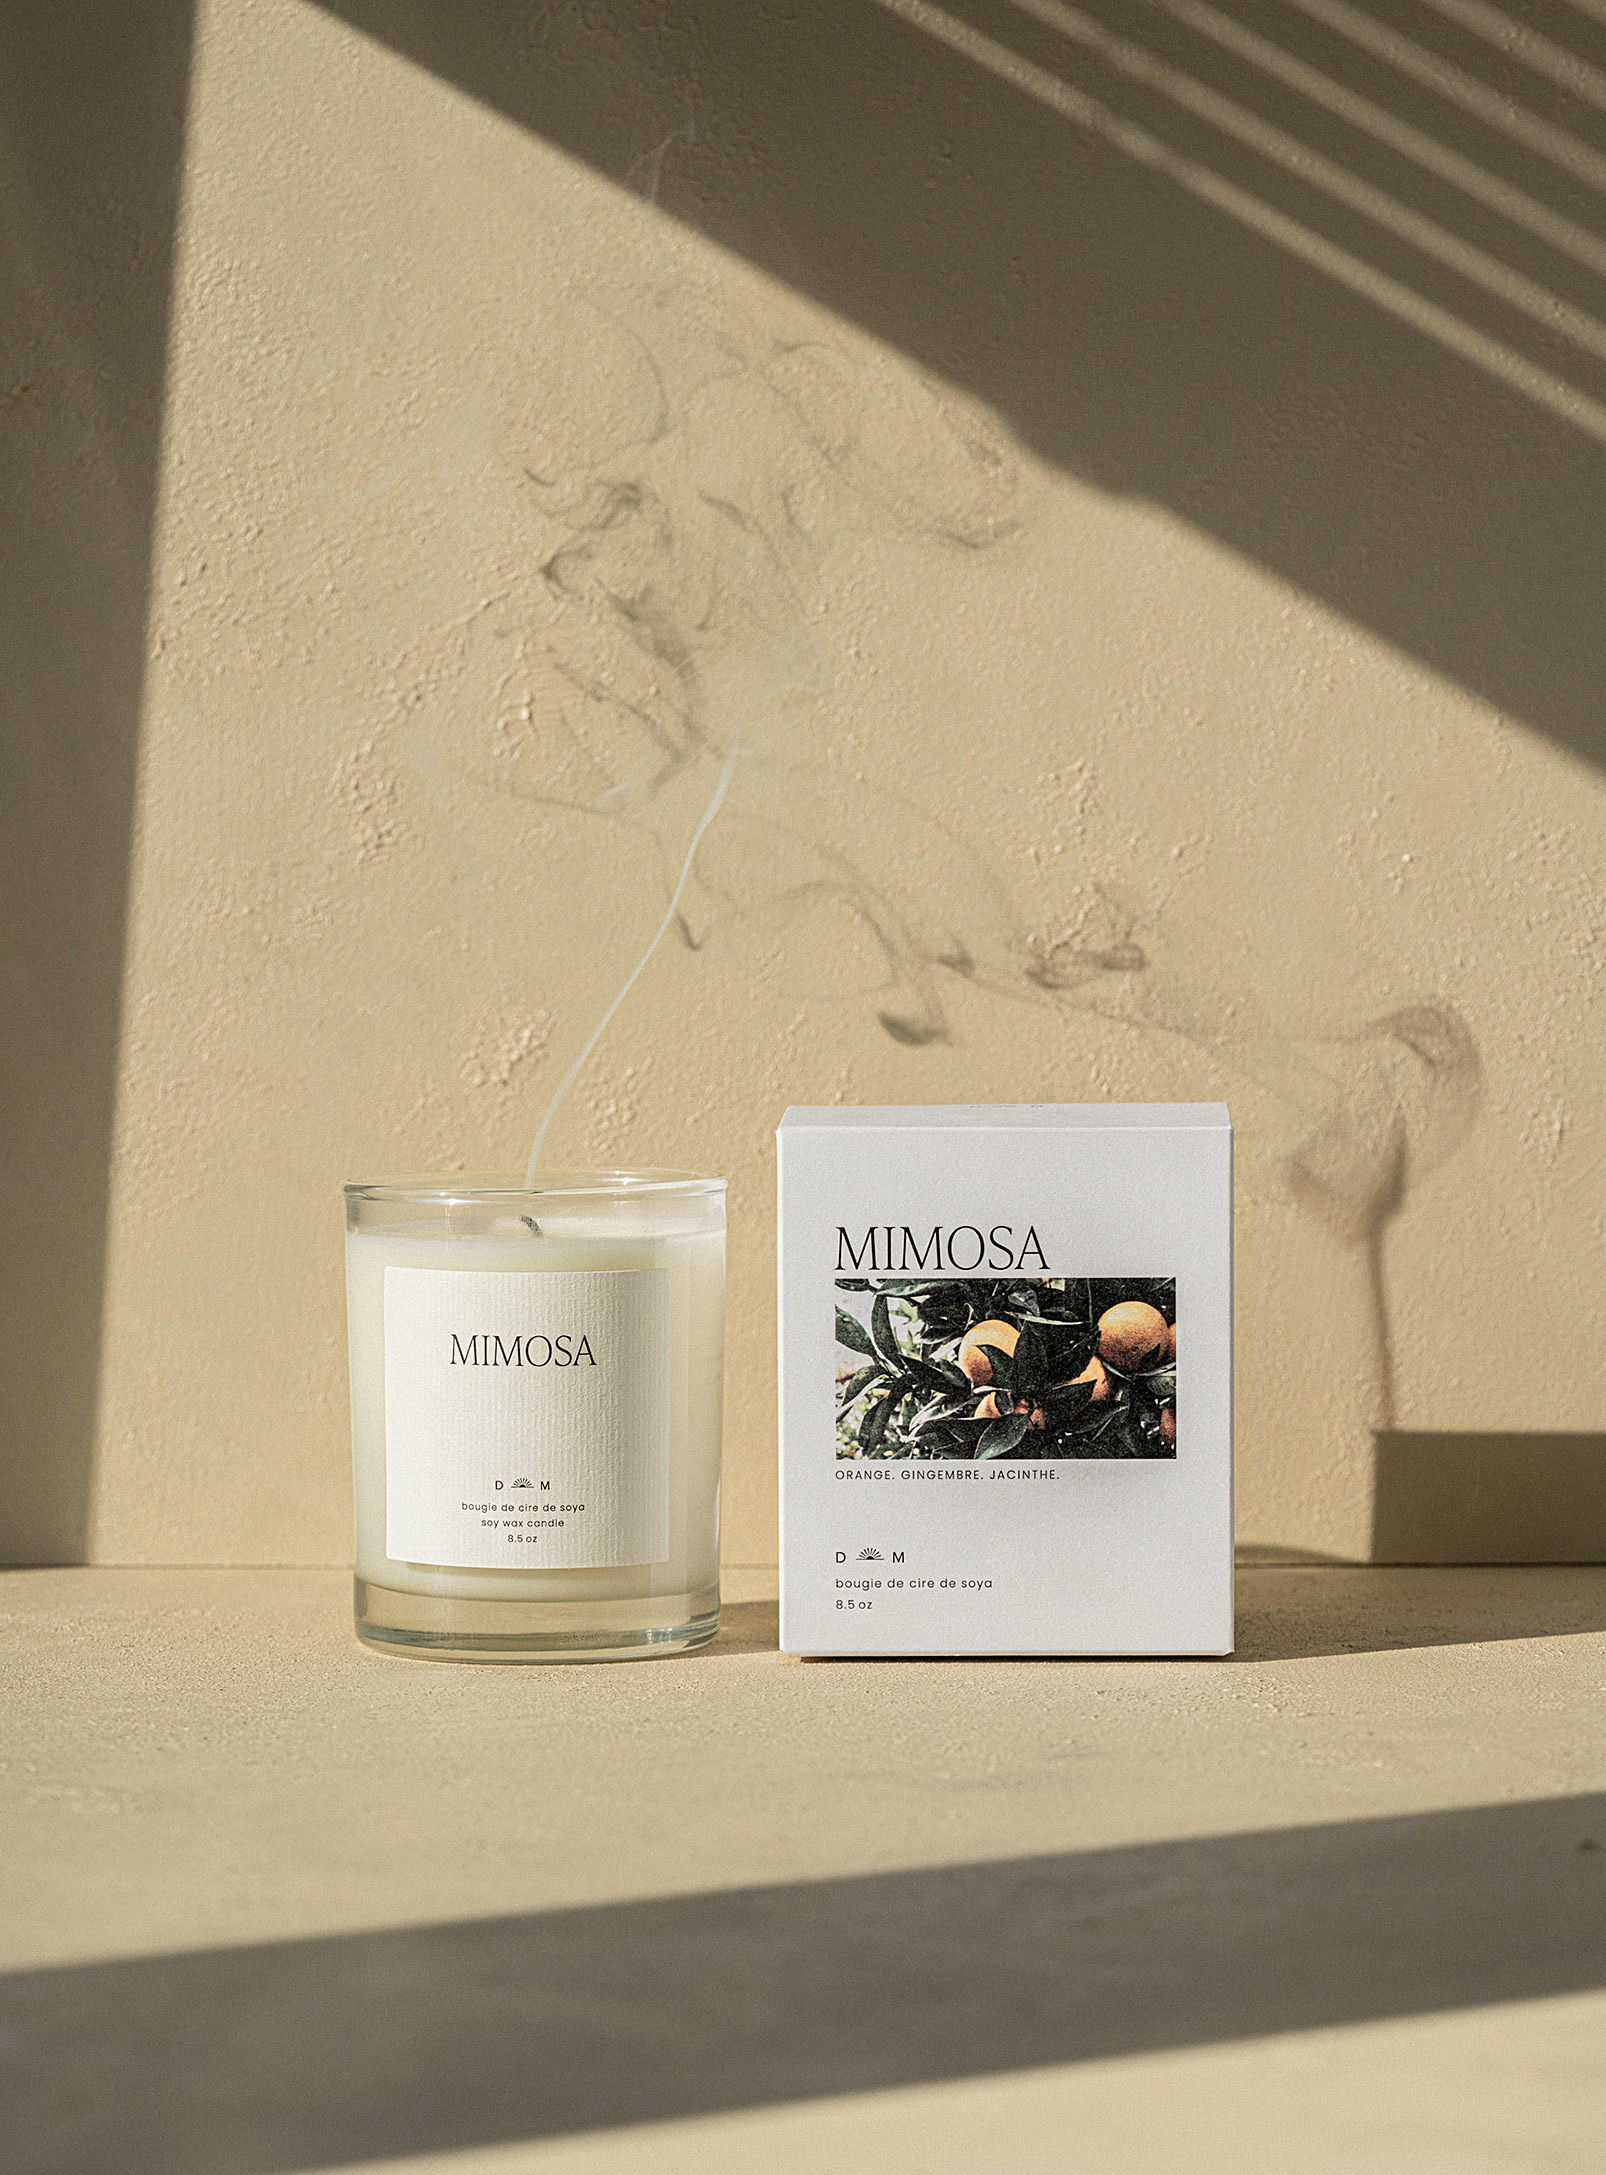 Dimanche Matin - Mimosa candle